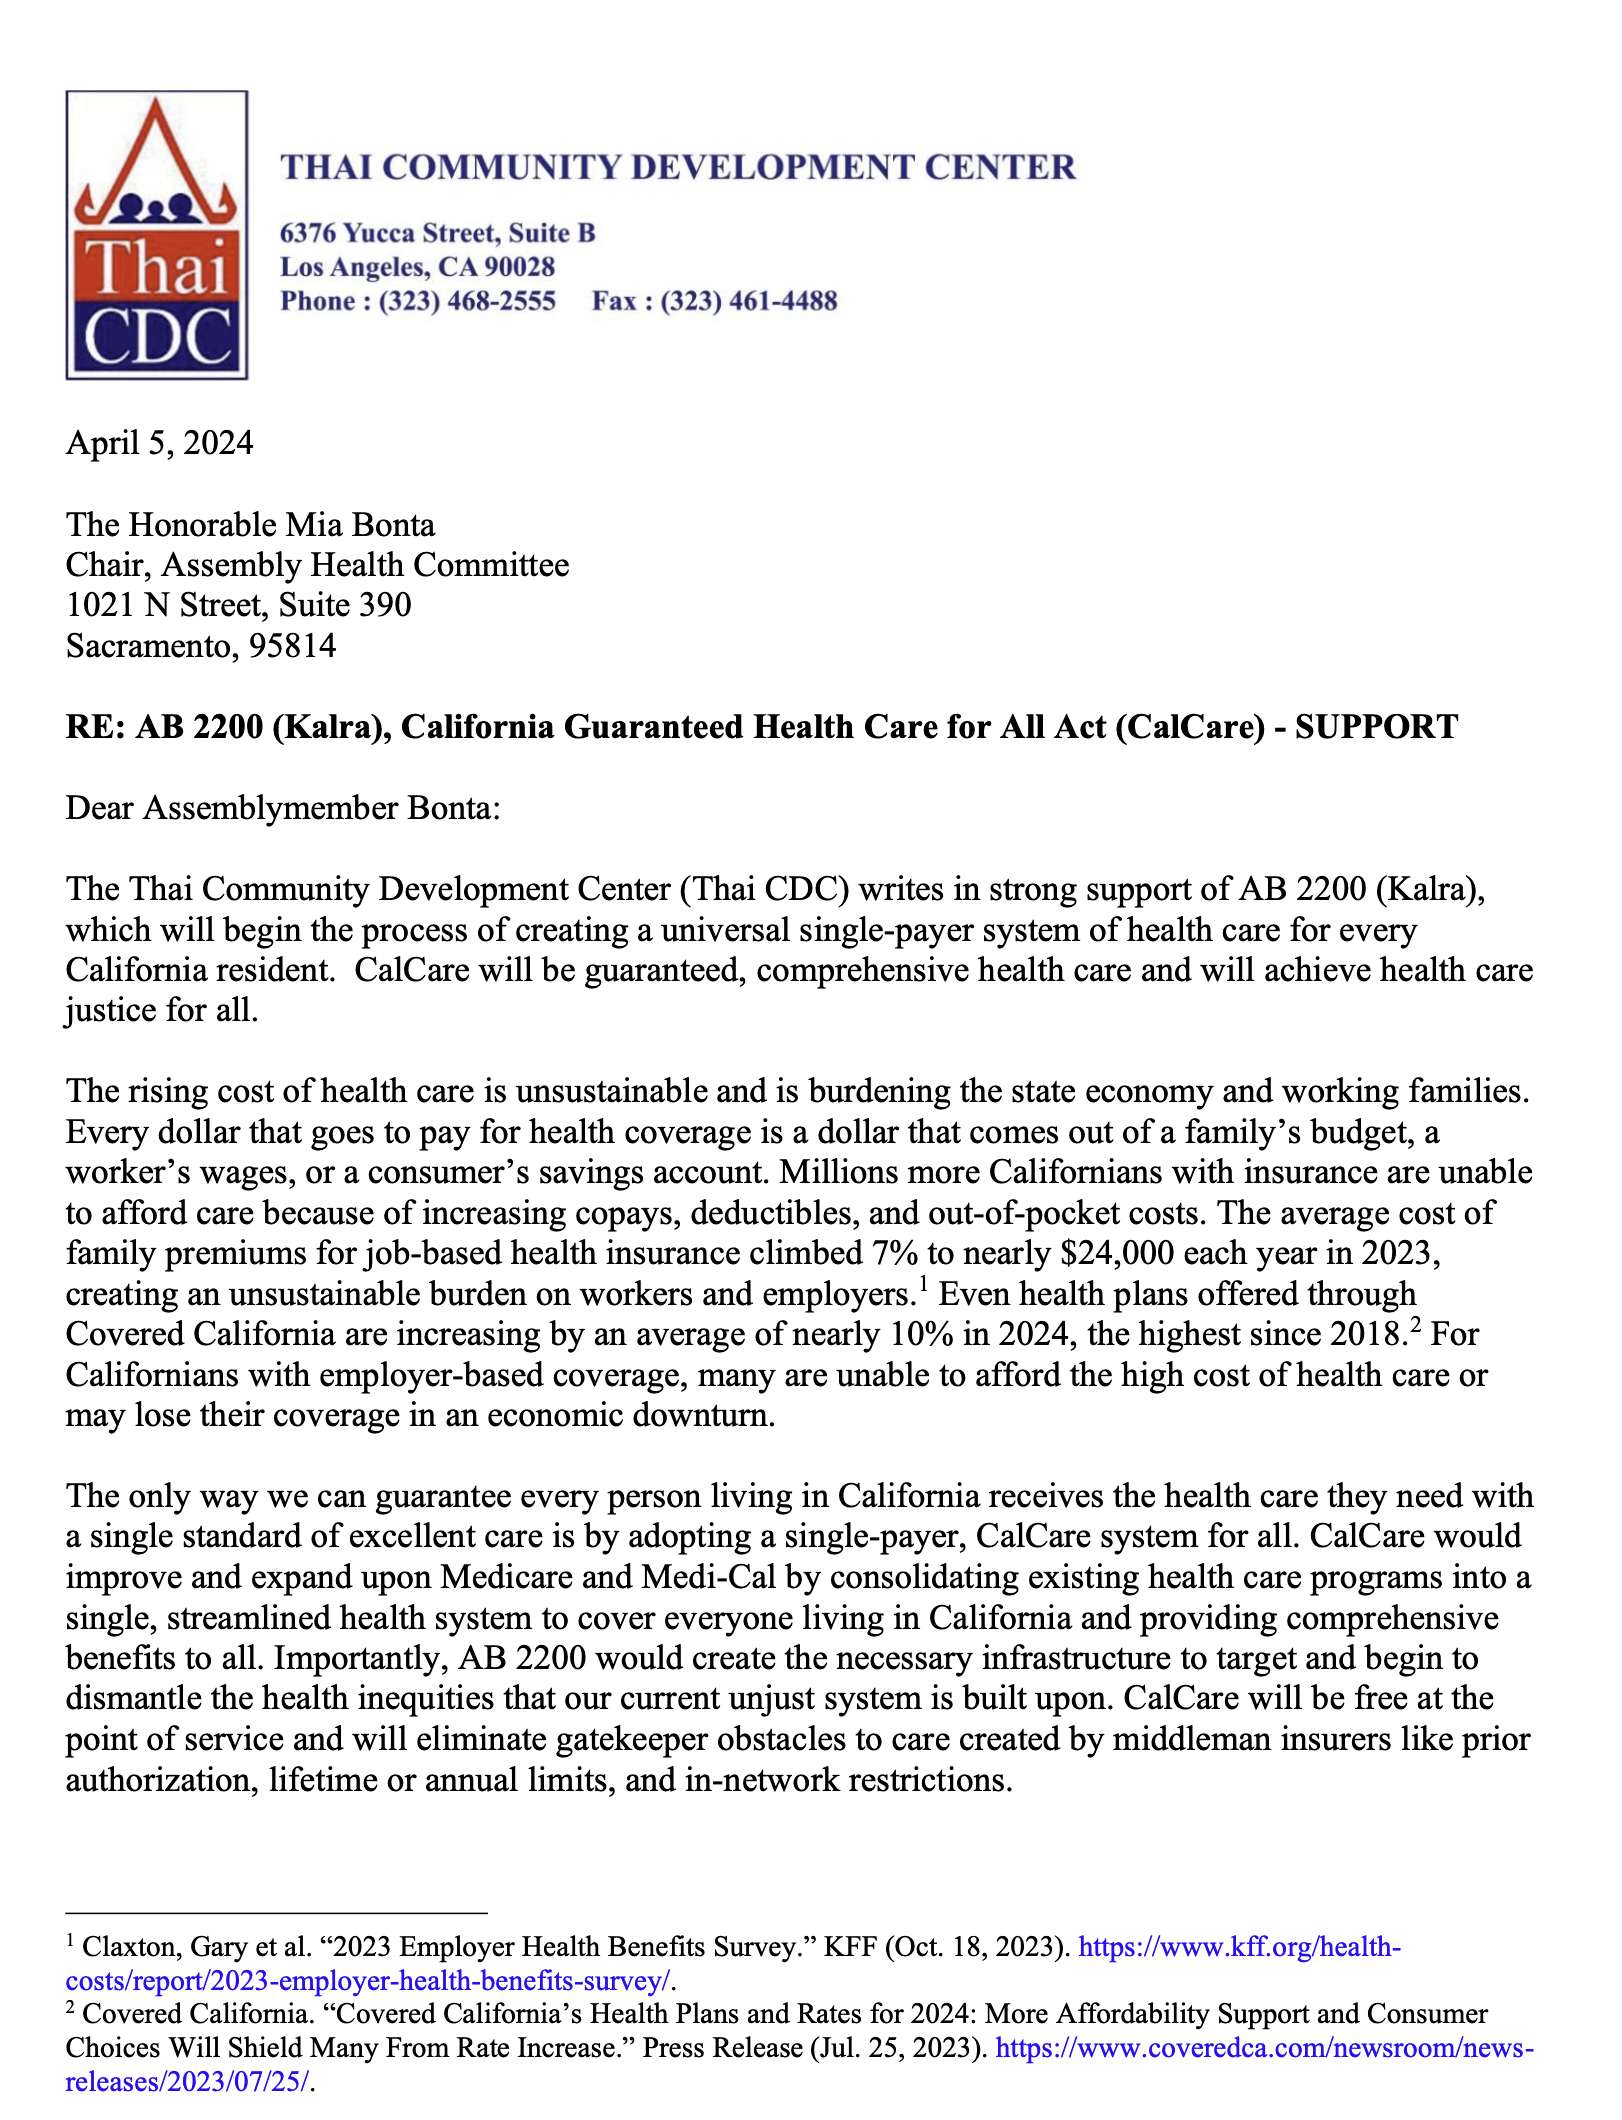 Thai CDC support letter for AB 2200 to the CA Assembly Committee on Health, p1 of 2